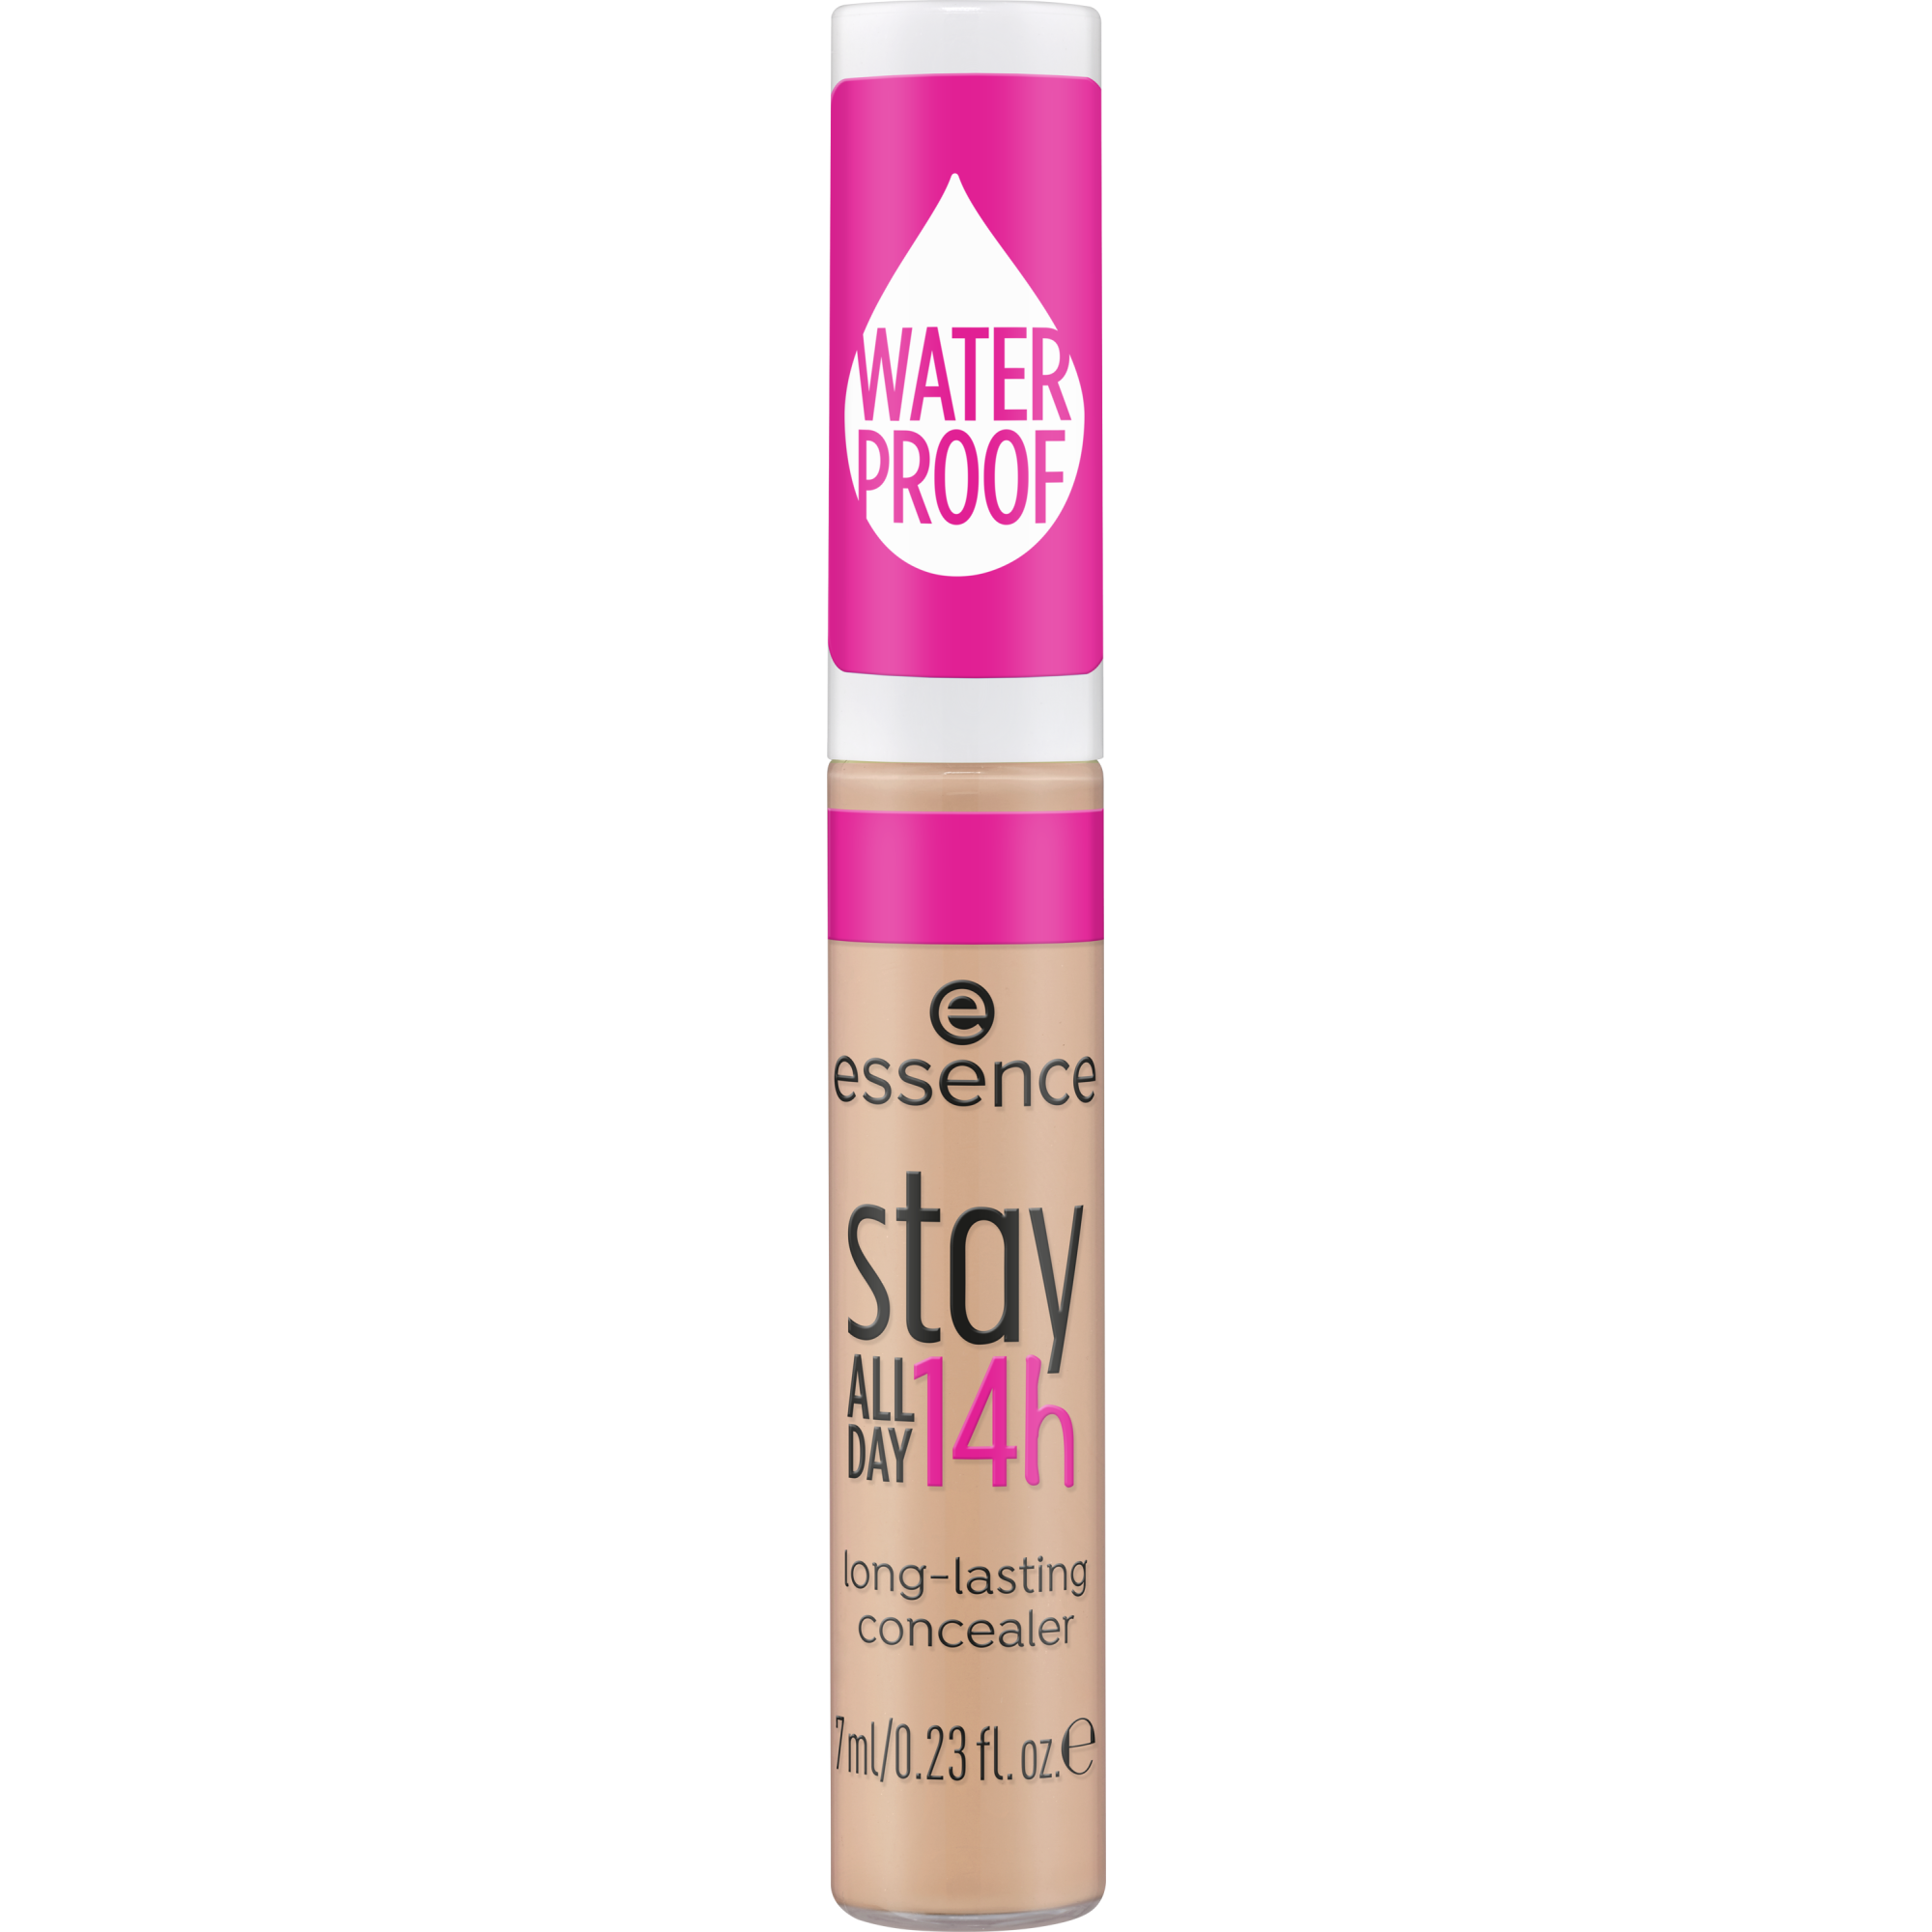 stay ALL DAY 14h long-lasting concealer correcteur longue tenue